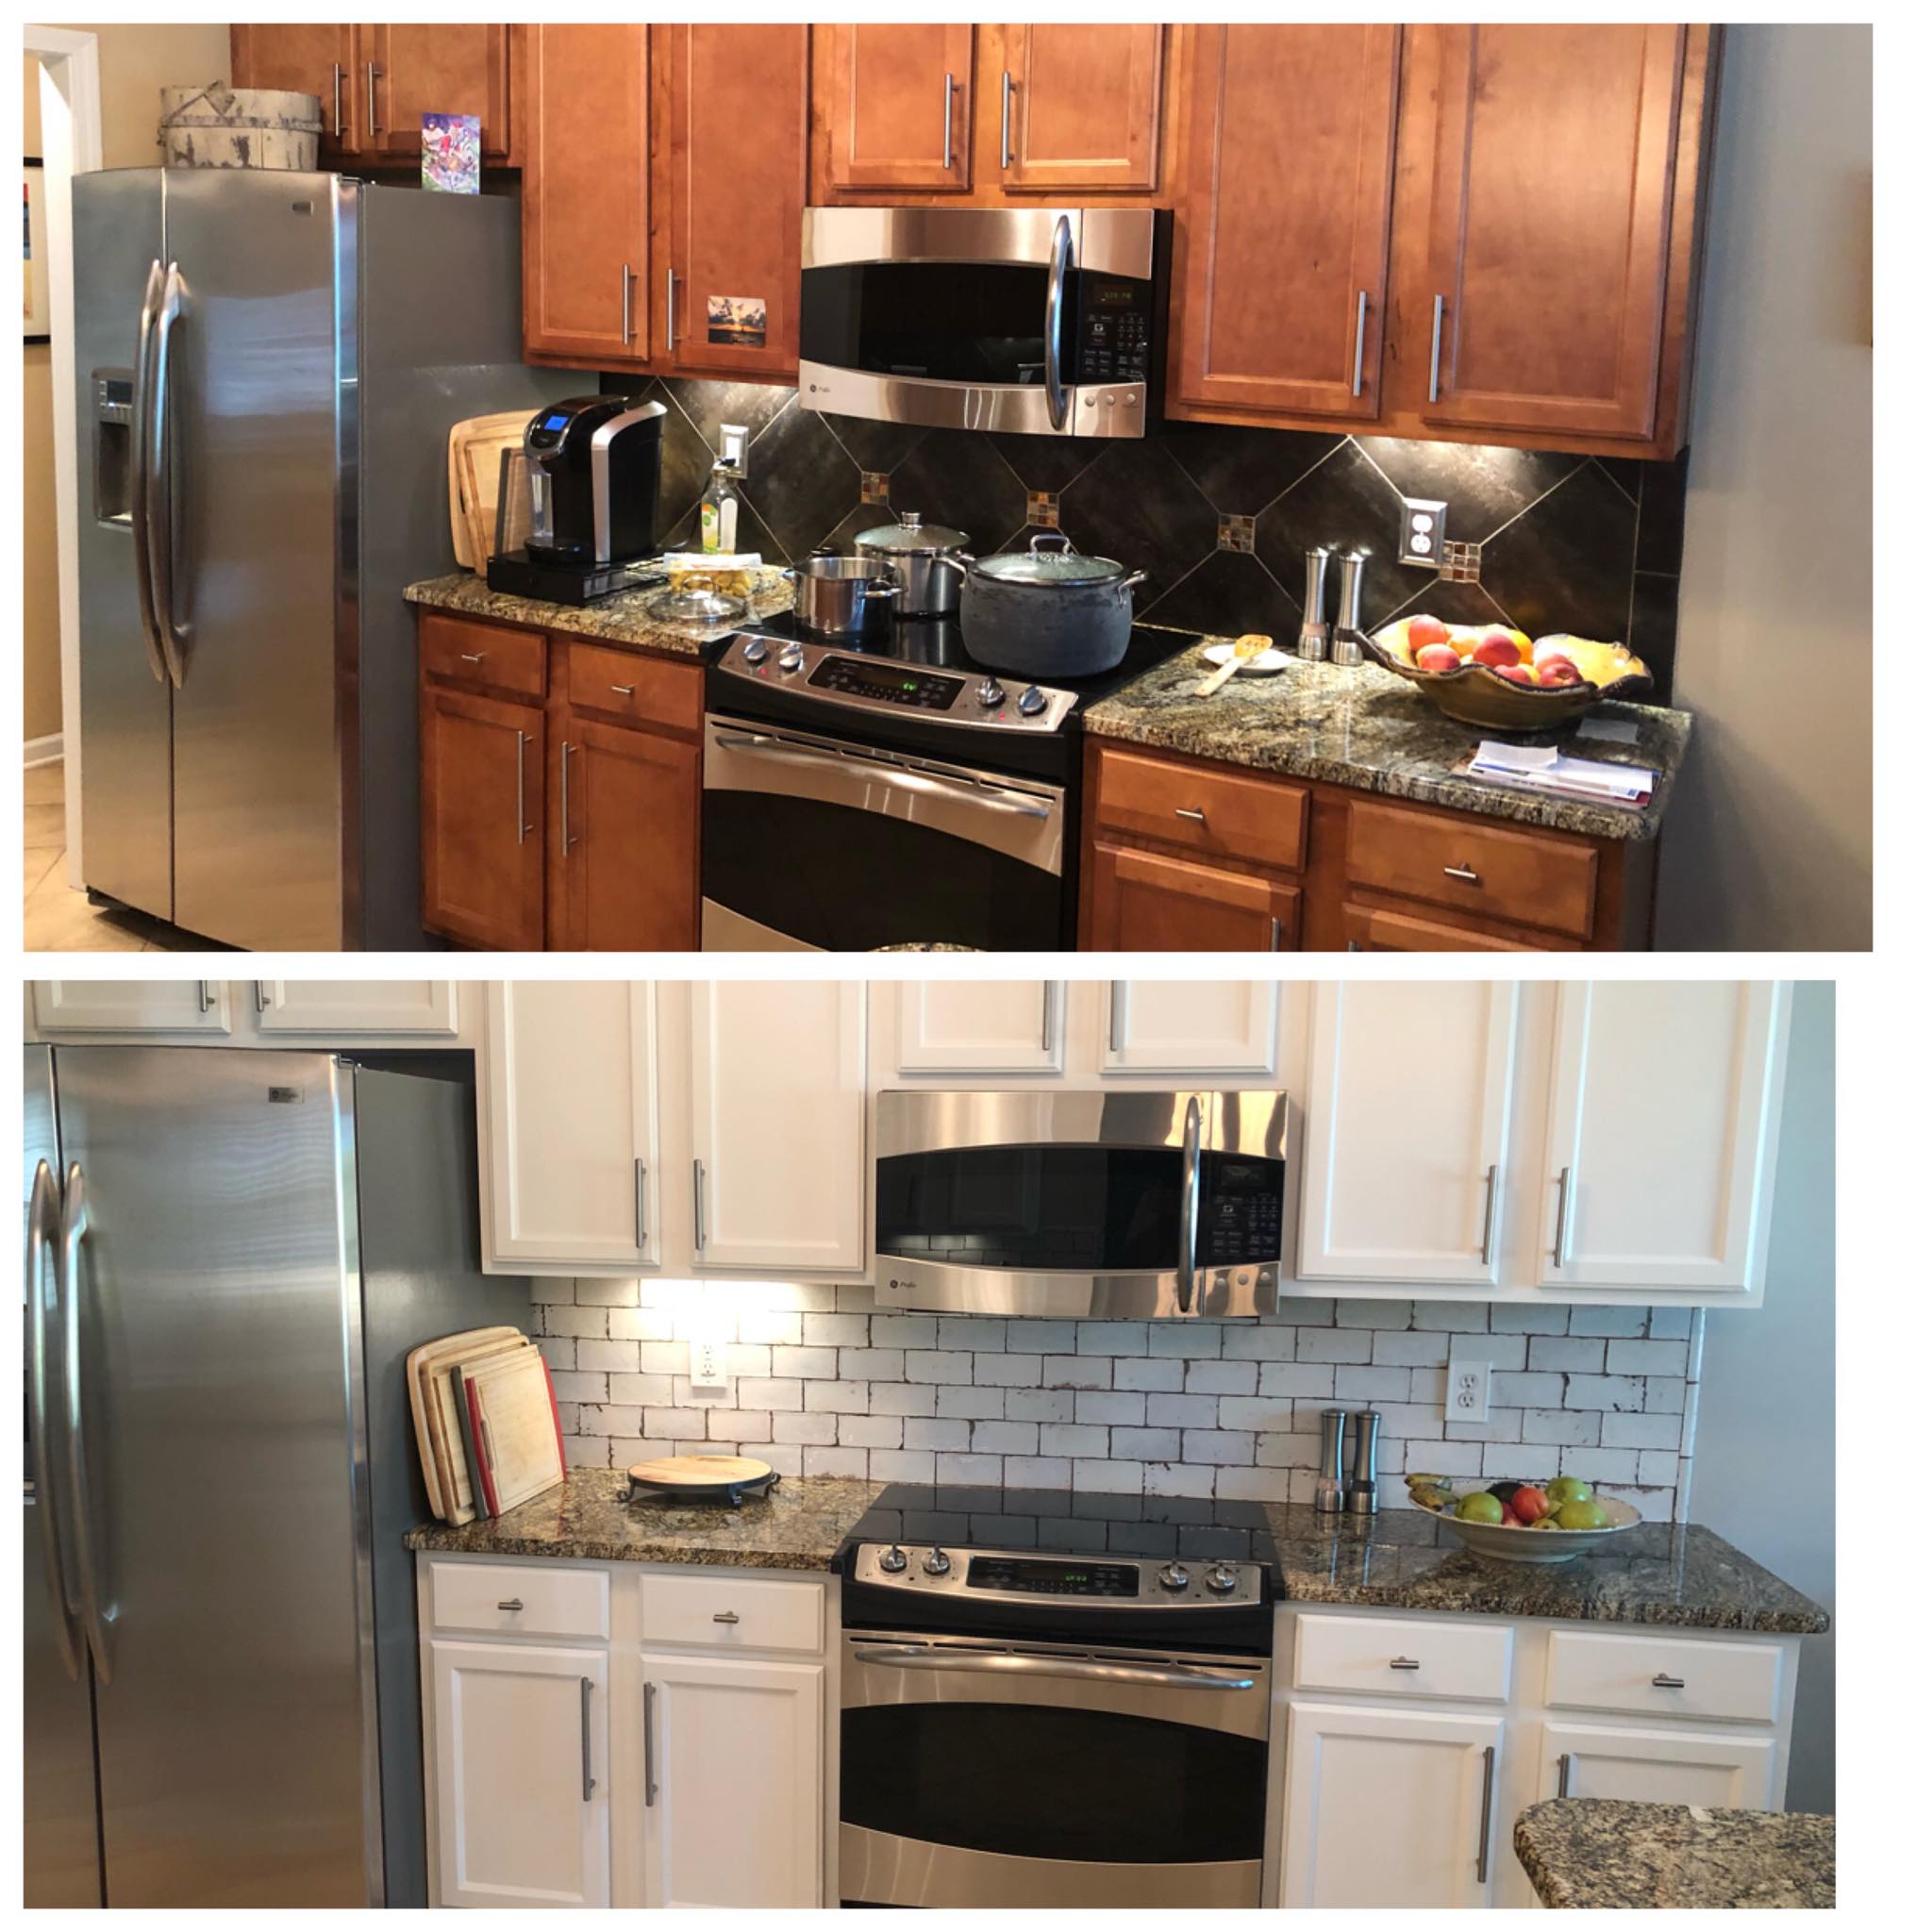 Custom Painted Kitchen Cabinets Double Door Corner Cabinets and Lazy Susan Before and After